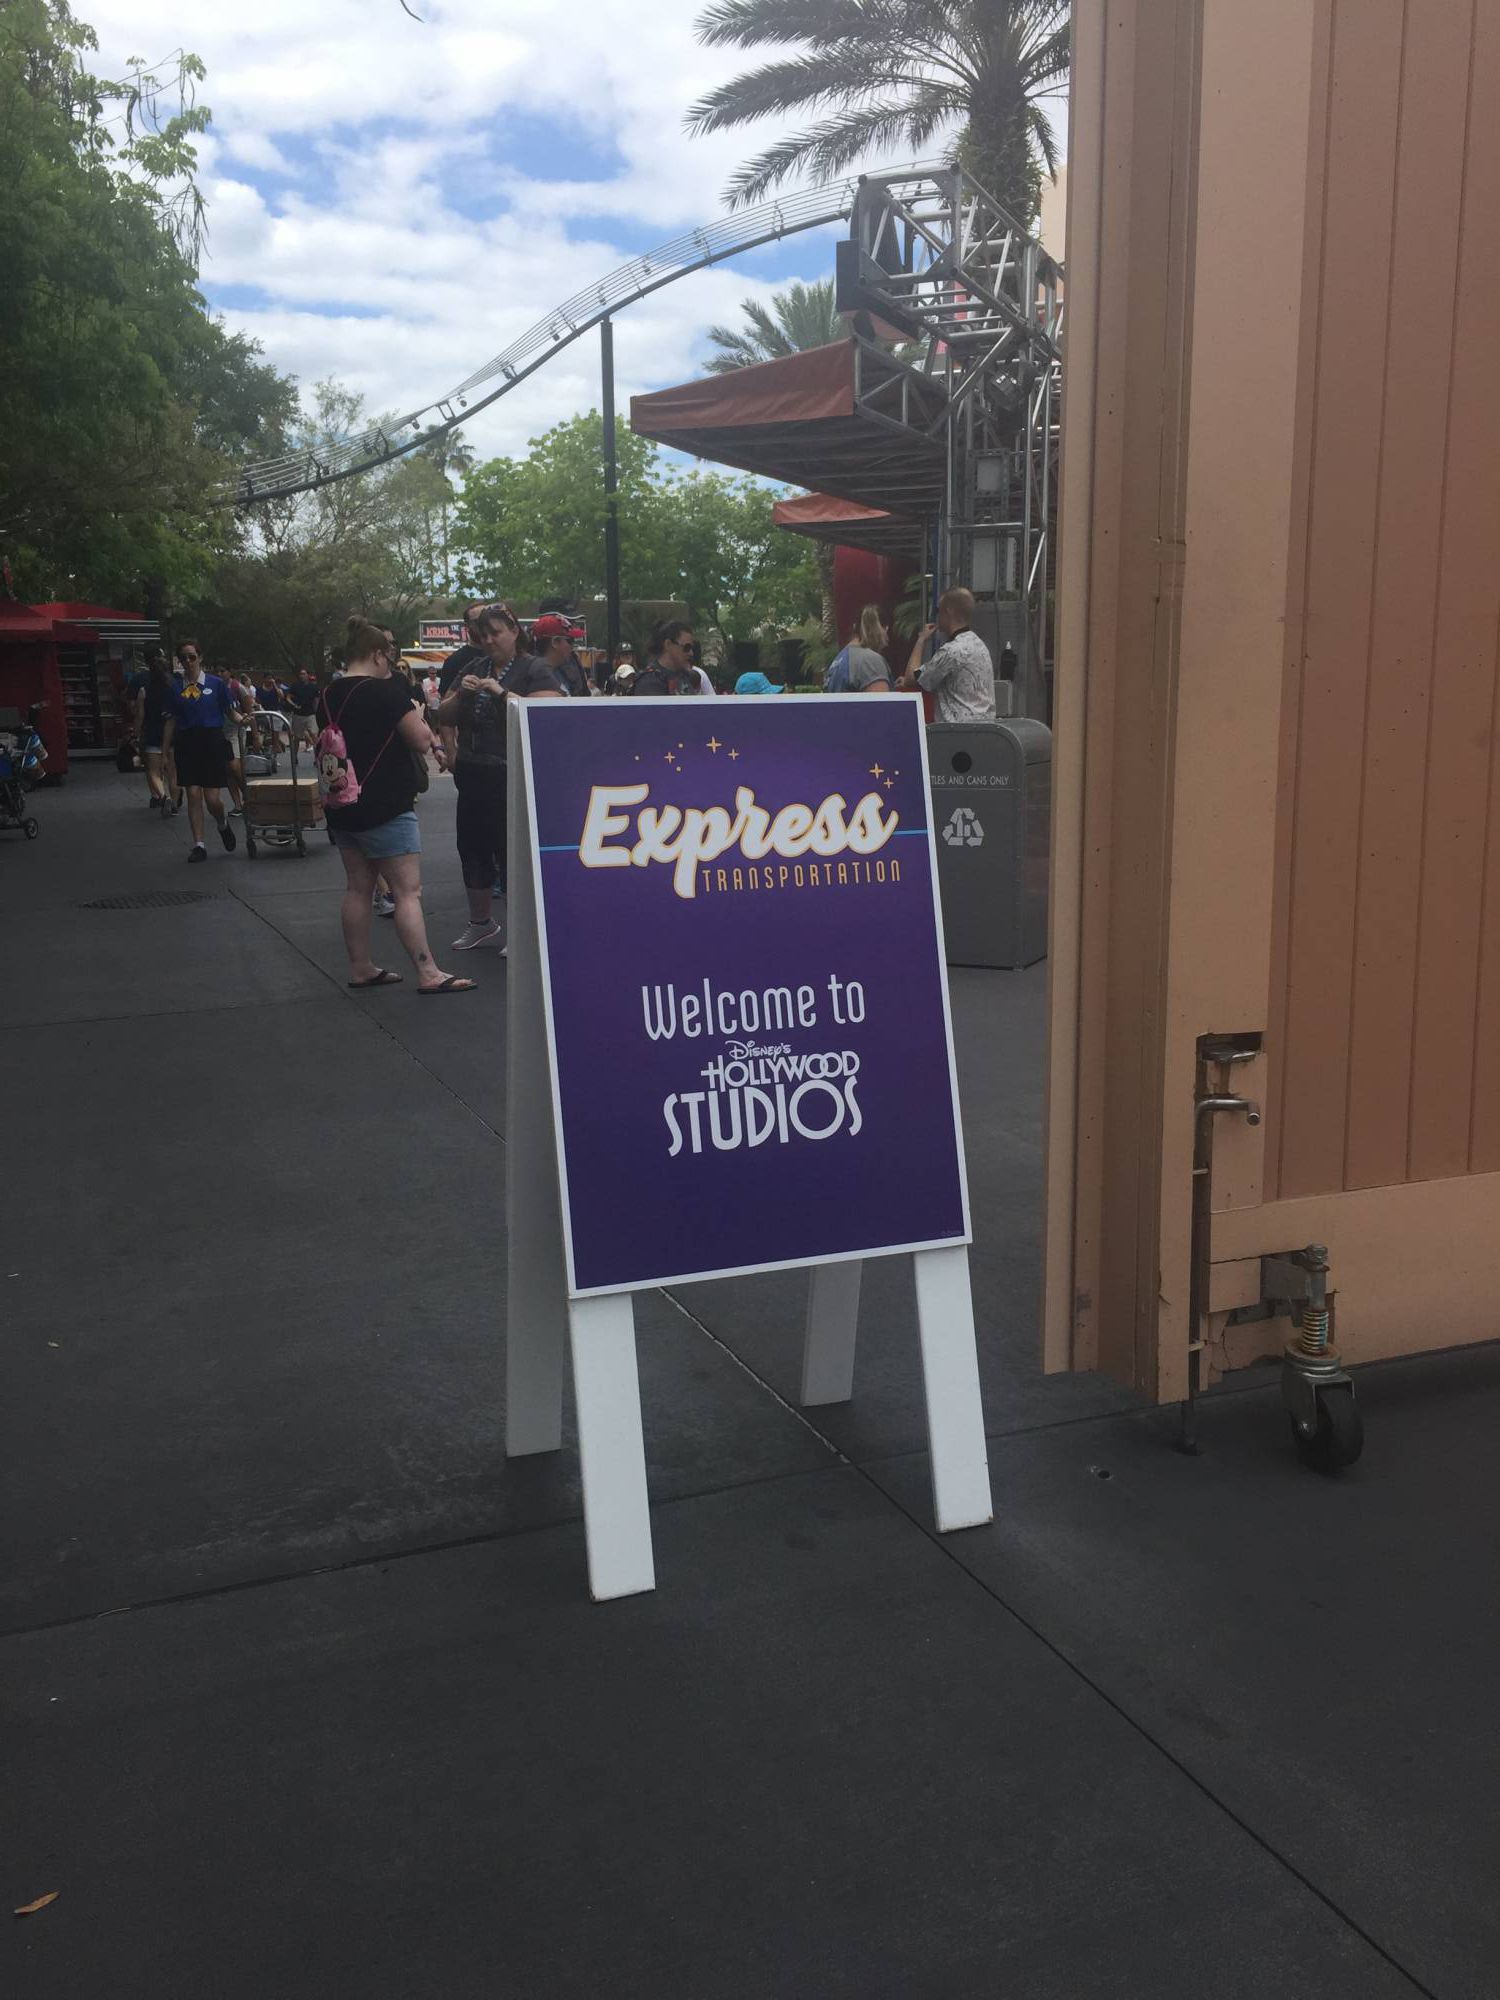 Make the most of your time with strategic use of FastPass+ and Express Transportation |PassPorter.com